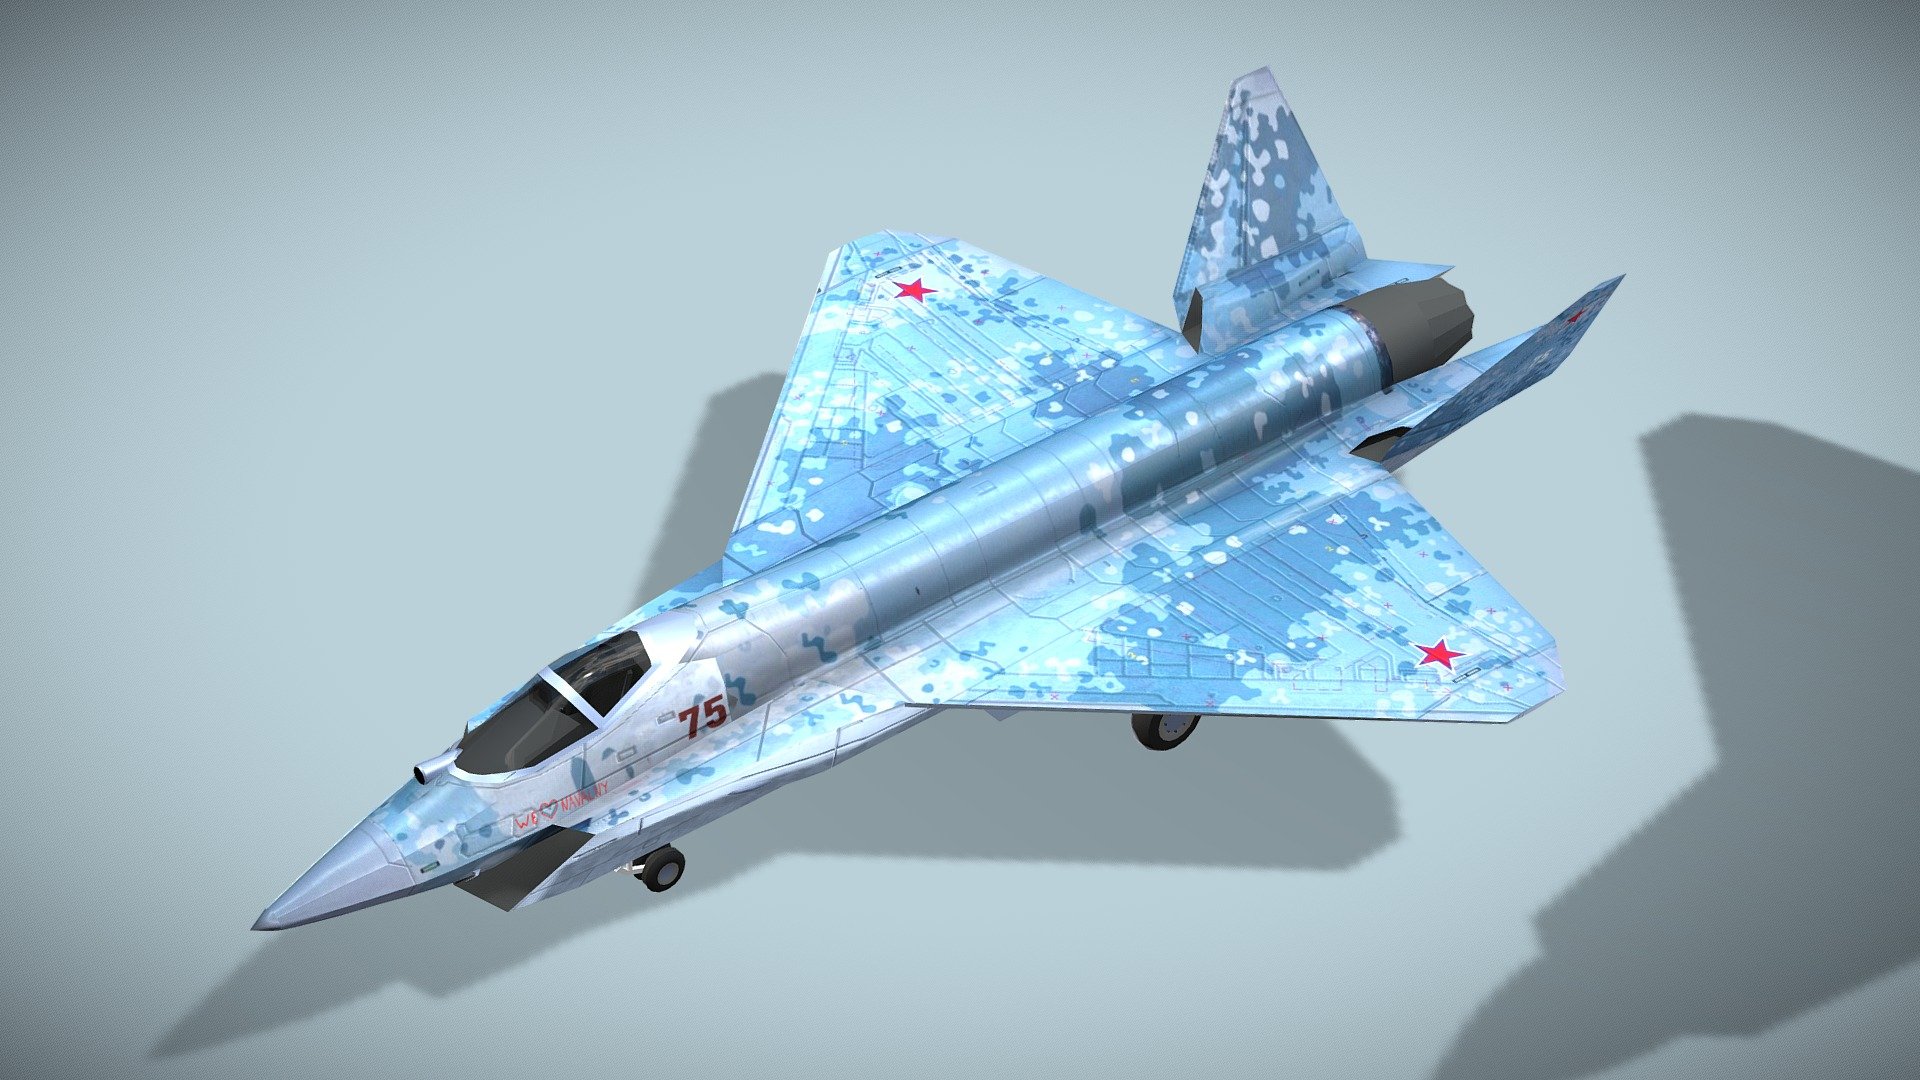 Sukhoi SU-75 Checkmate

Lowpoly model of russian jet fighter



Sukhoi Su-75 Checkmate is a single-engine, stealth fighter aircraft under development by Sukhoi for export and for the Russian Aerospace Forces. Su-75 Checkmate has a diverterless inlet, a v-shape tail and internal weapons bays—all features intended to reduce radar signature. The angular ventral inlet, which wraps around the lower nose section, shares features with a diverterless supersonic inlet (DSI) design concept first introduced in the Boeing X-32 aircraft. Instead of separate horizontal and vertical stabilizers with moving rudders and elevators, the Su-75 fighter has “ruddervators” similar to that of Northrop Grumman YF-23



1 standing version with wheels and 2 flying versions with trails, afterburner, pilot and armament.

Model has bump map, roughness map and 3 x diffuse textures.



Check also my other aircrafts and cars.

Patreon with monthly free model - Sukhoi SU-75 Checkmate - Buy Royalty Free 3D model by NETRUNNER_pl 3d model